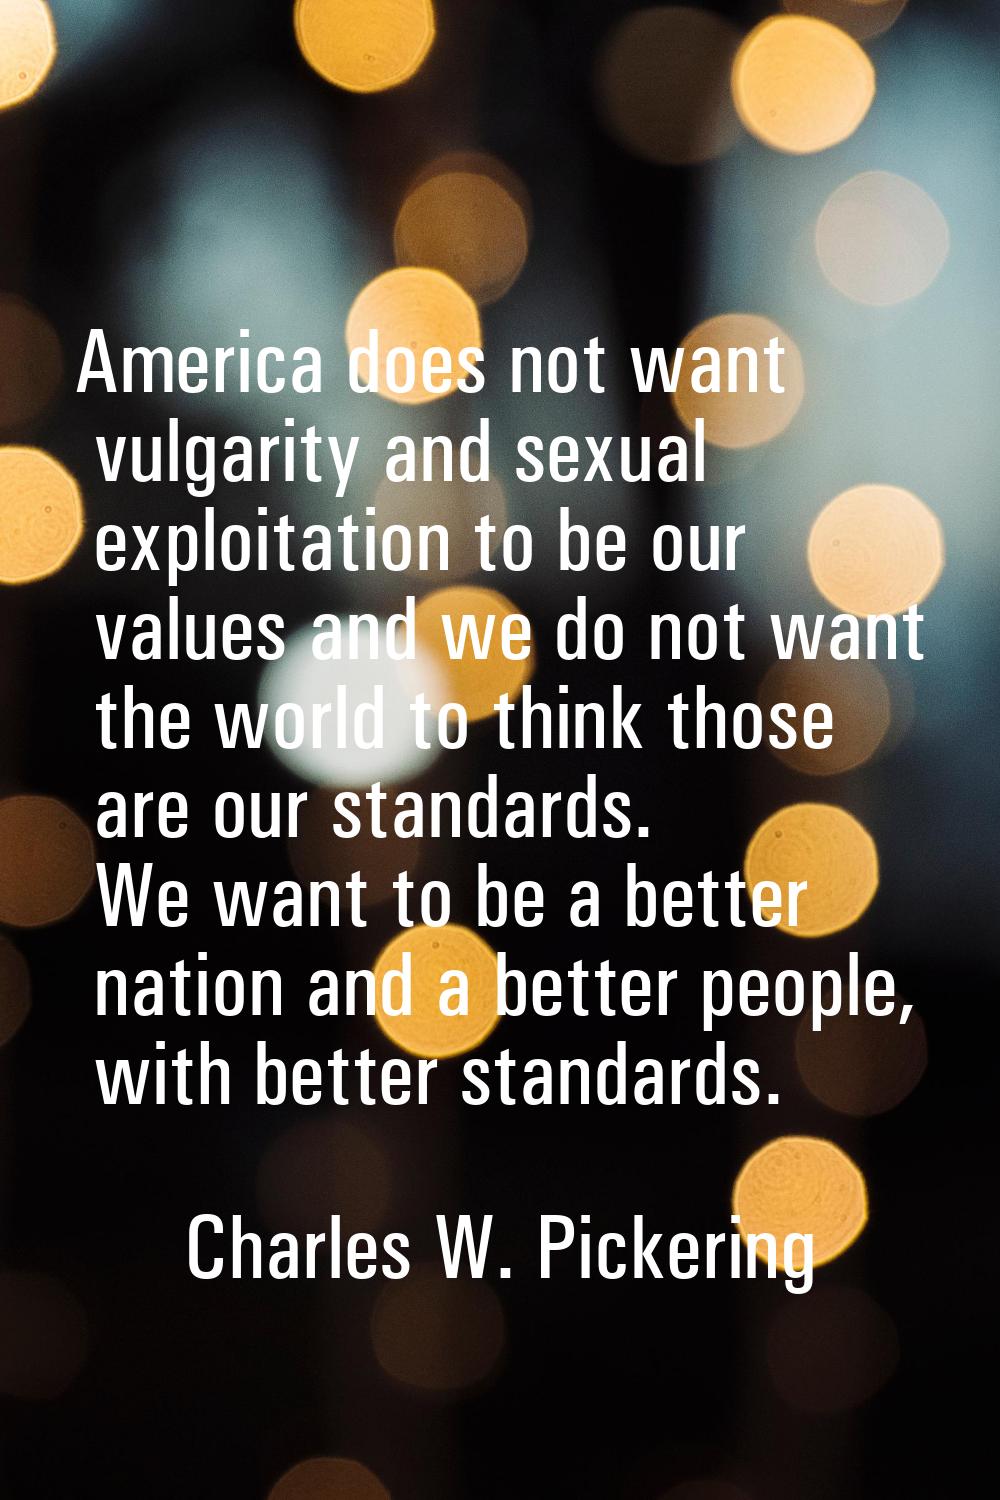 America does not want vulgarity and sexual exploitation to be our values and we do not want the wor